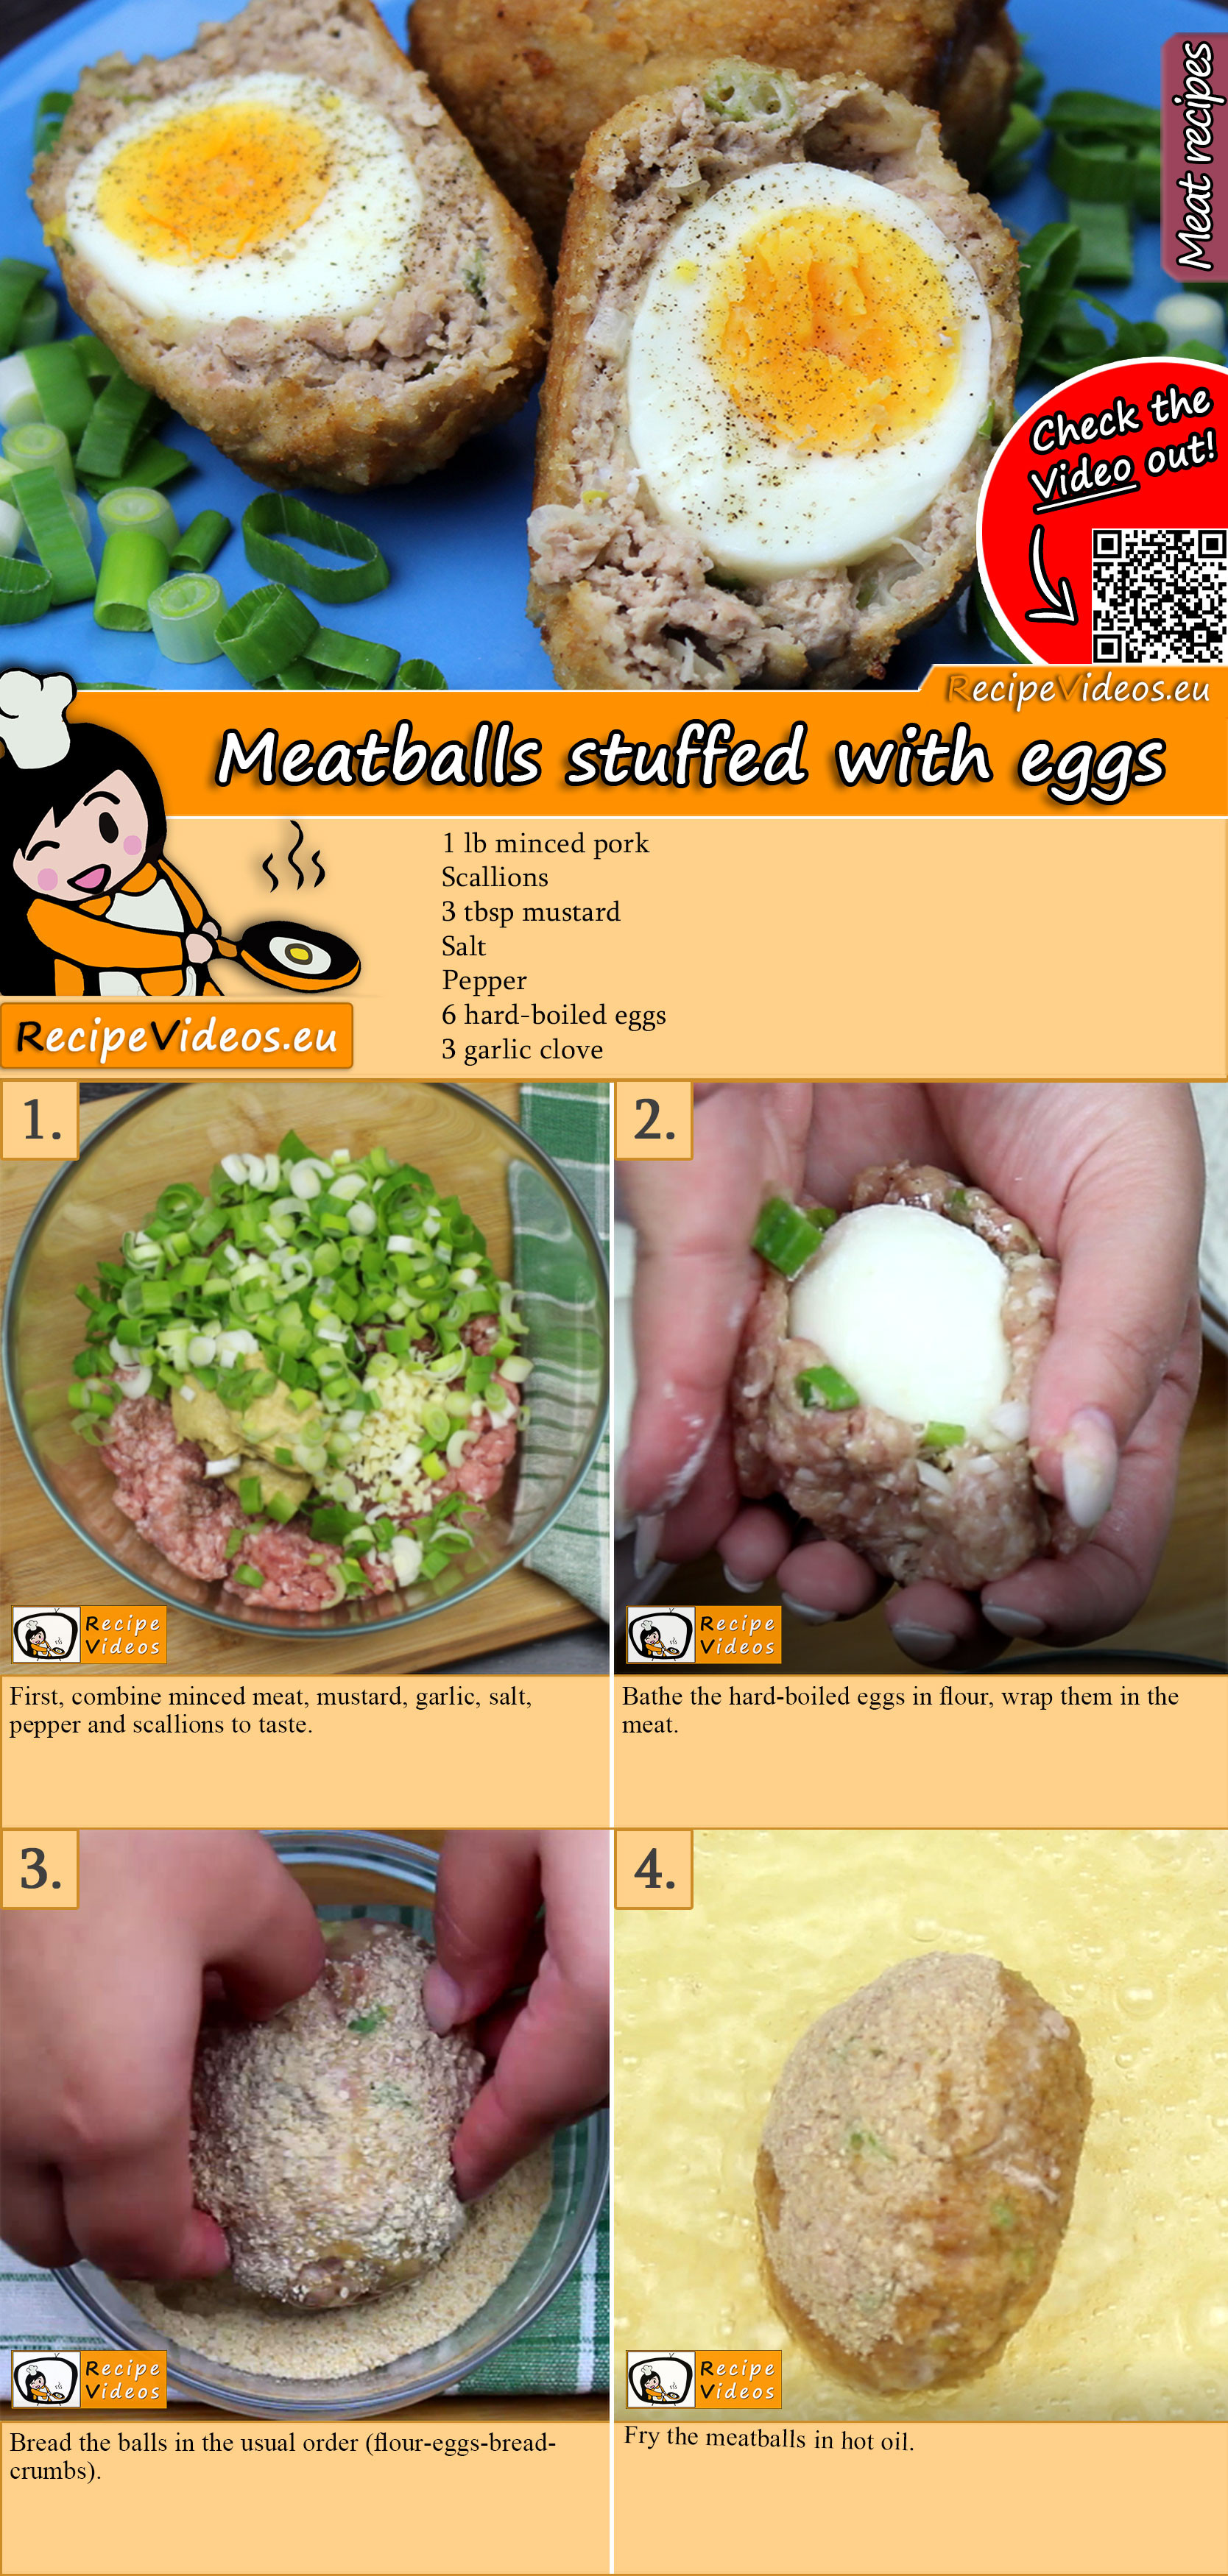 Meatballs stuffed with eggs recipe with video